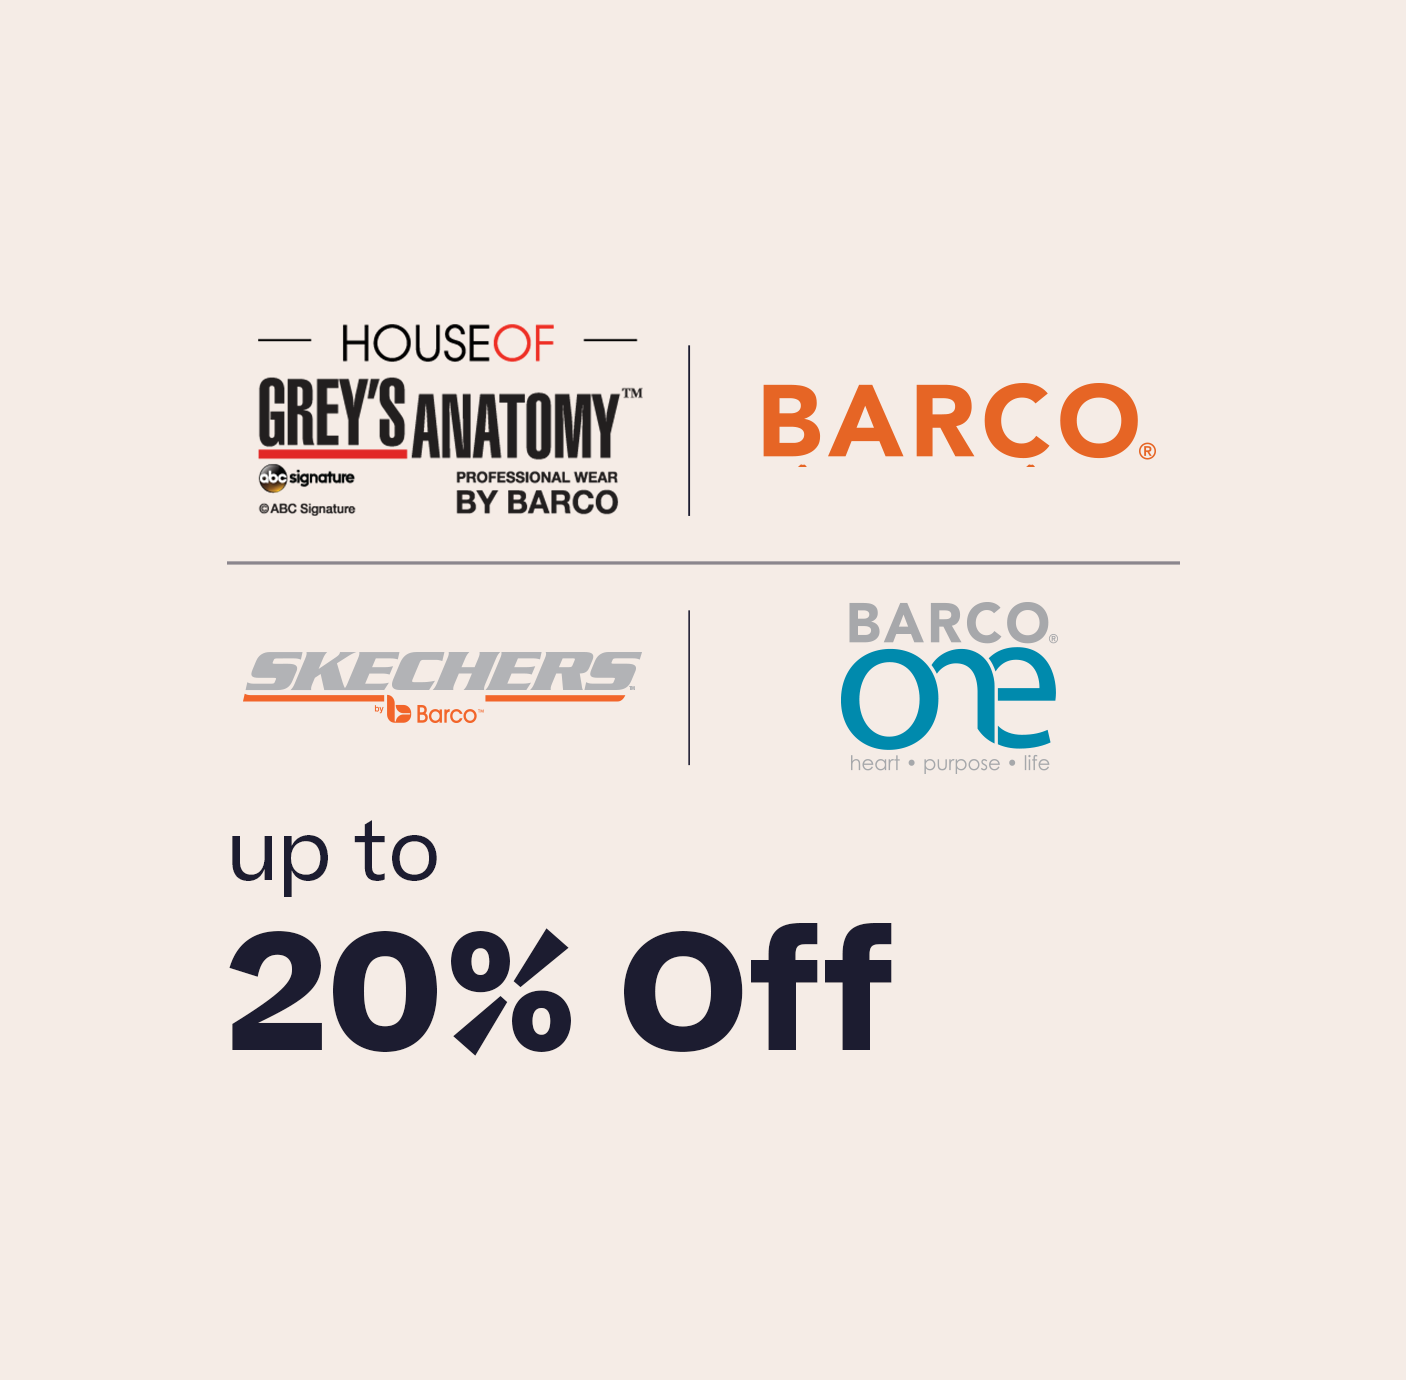 Up to 20% Off BARCO, BARCO ONE, GREY'S ANATOMY & SKECHERS plus Free U.S. Shipping Code 8FREESHIP